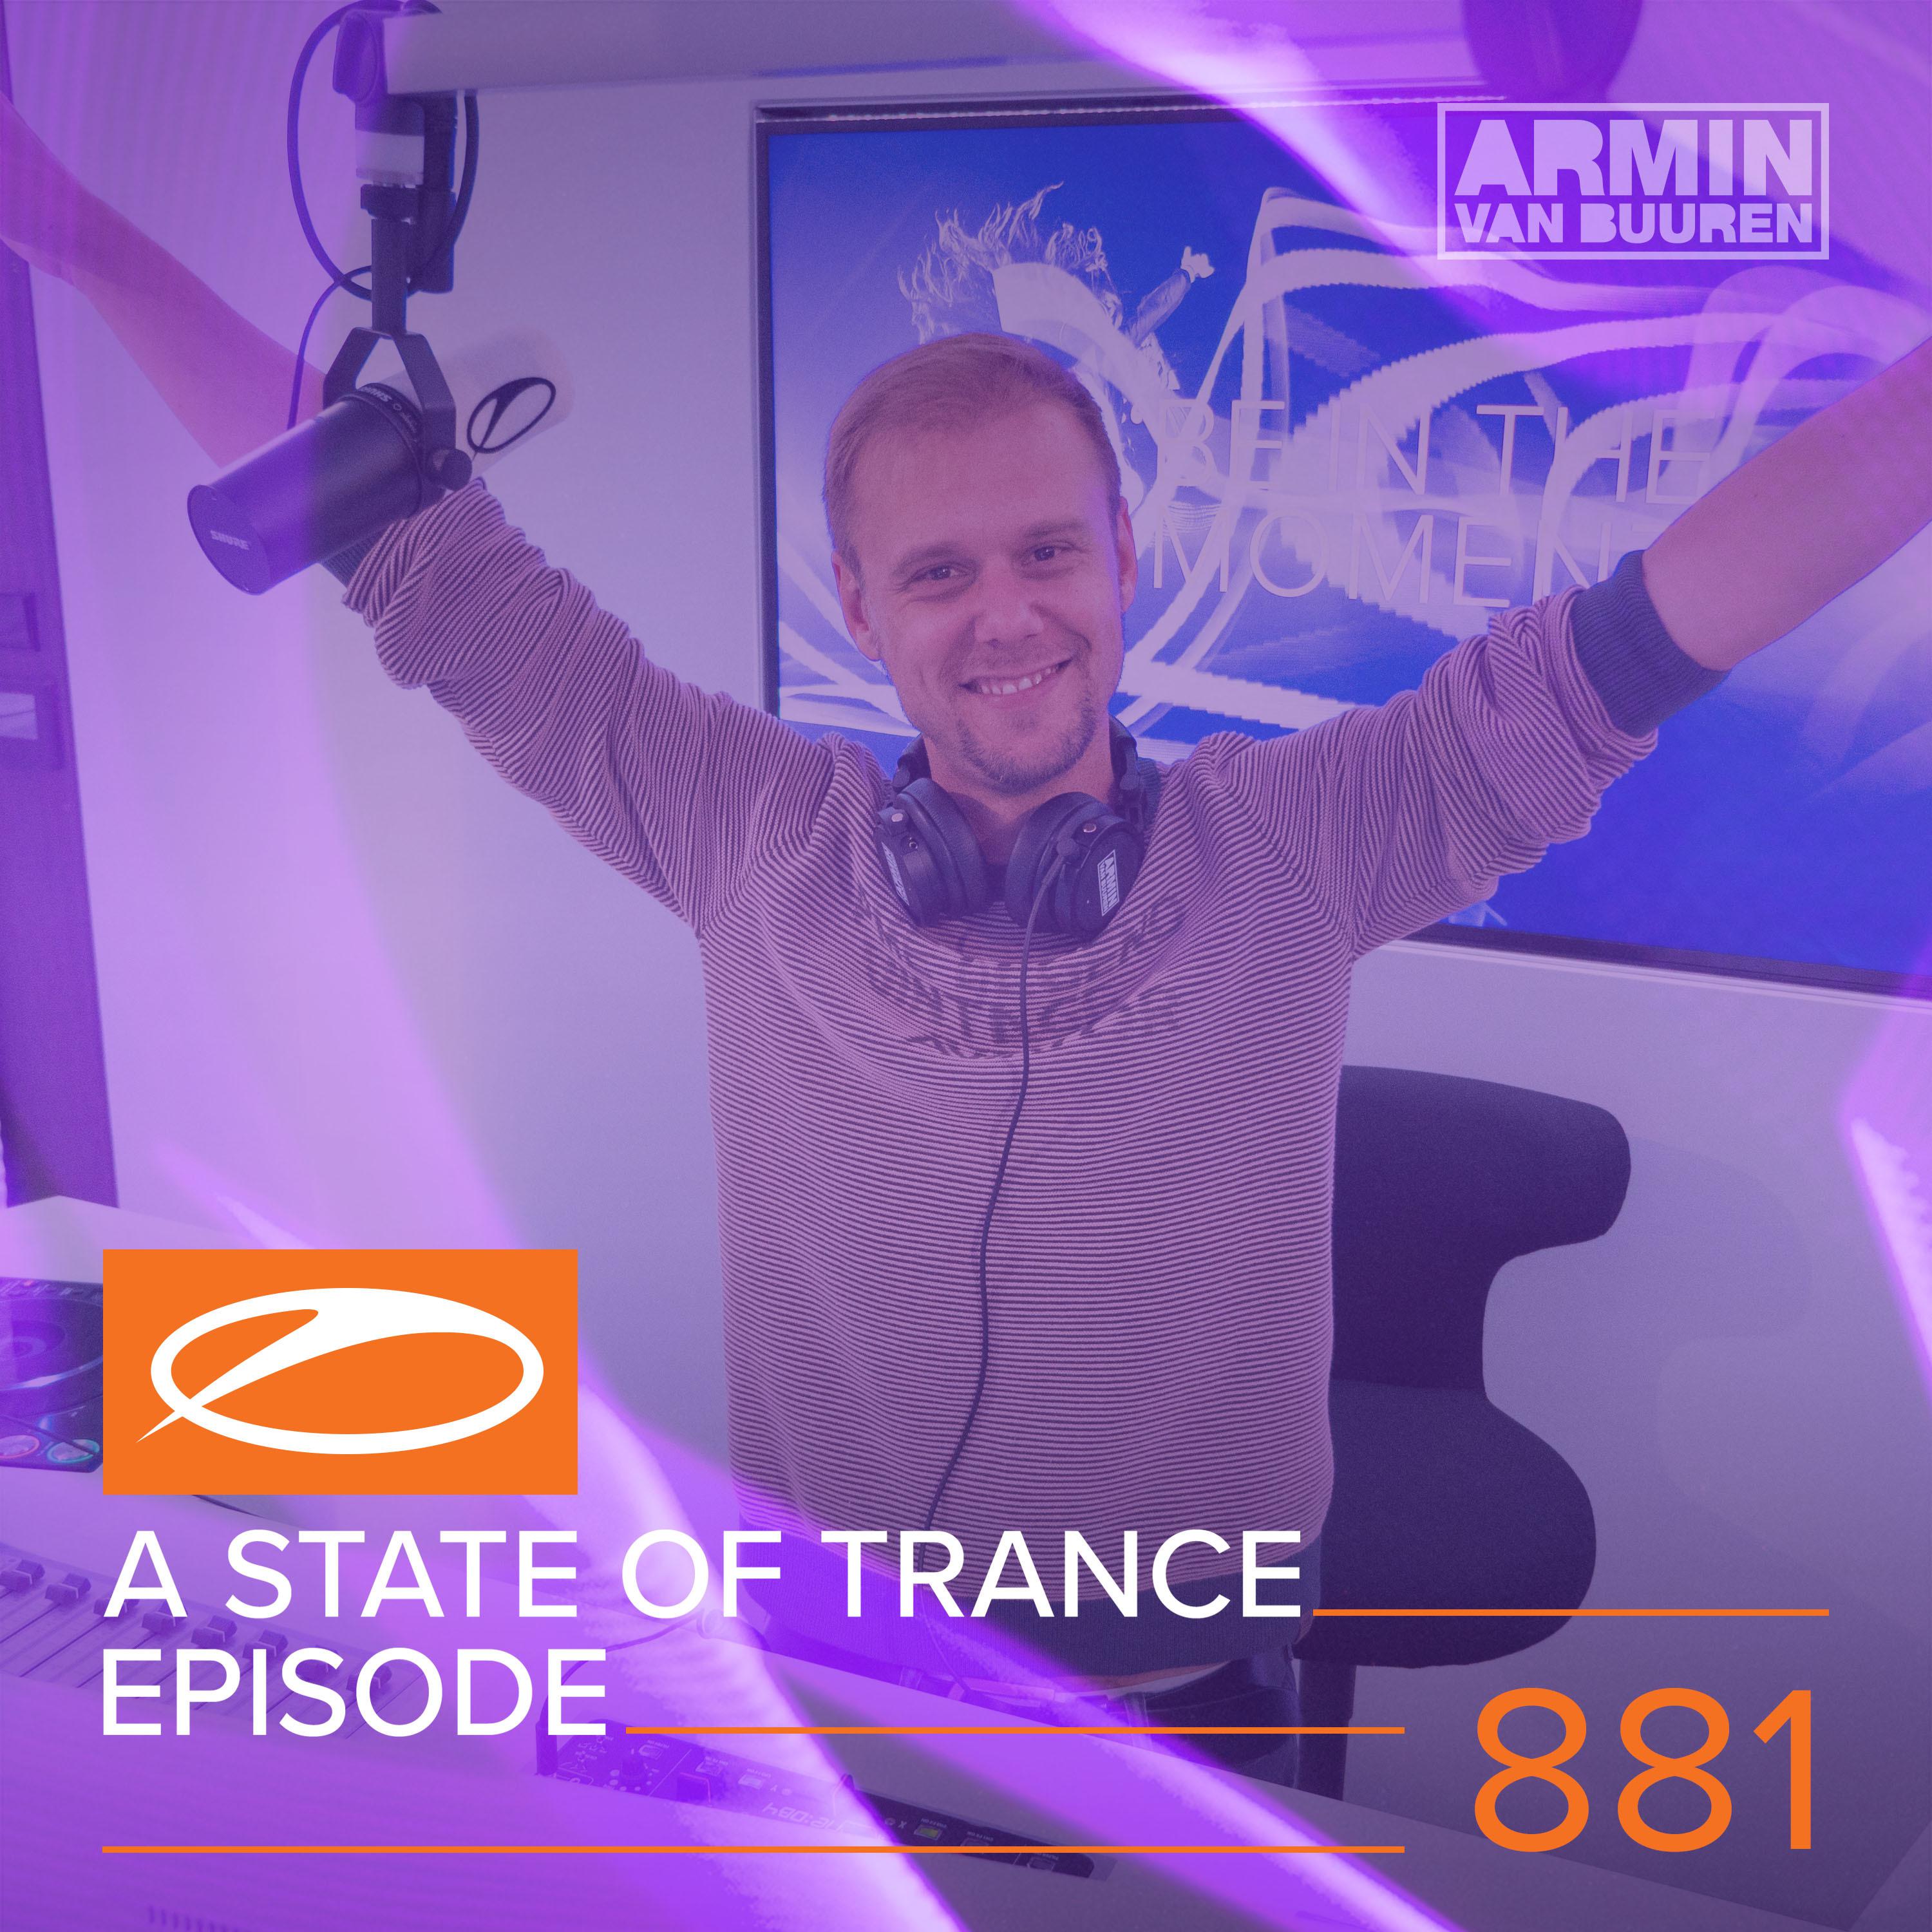 A State Of Trance (ASOT 881) (This Week's Service For Dreamers, Pt. 7)